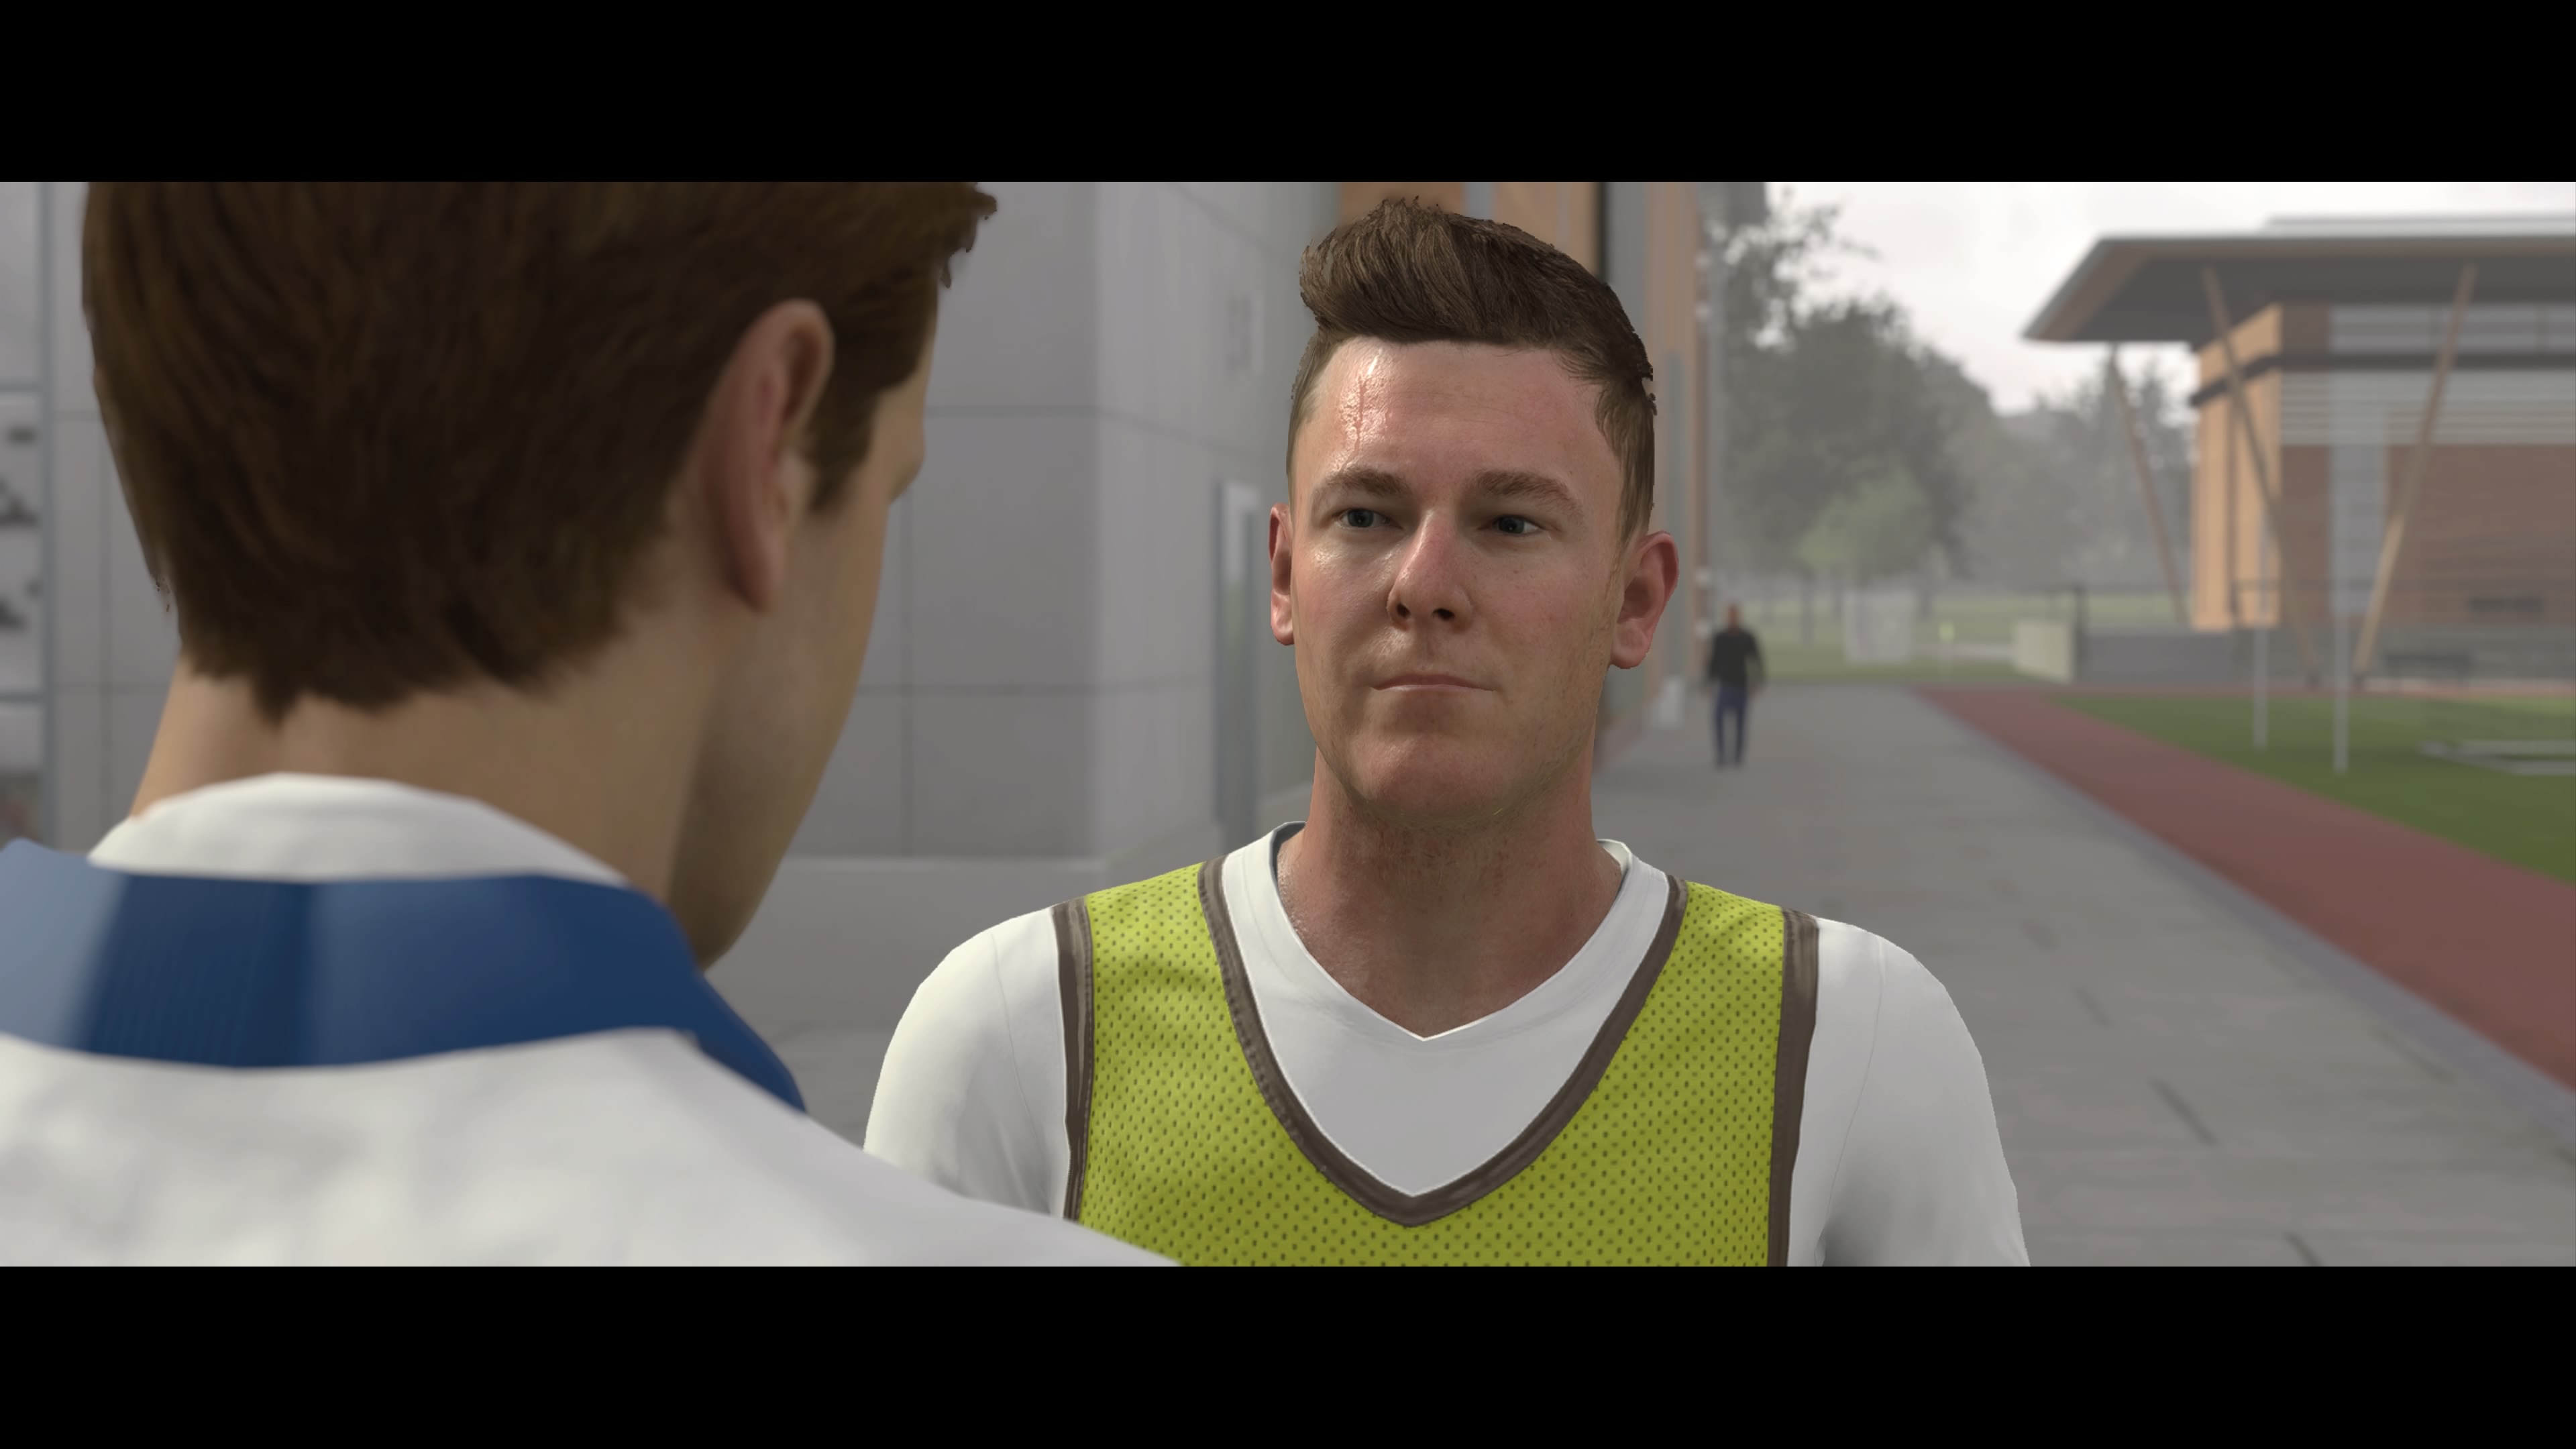 FIFA 19 The Journey